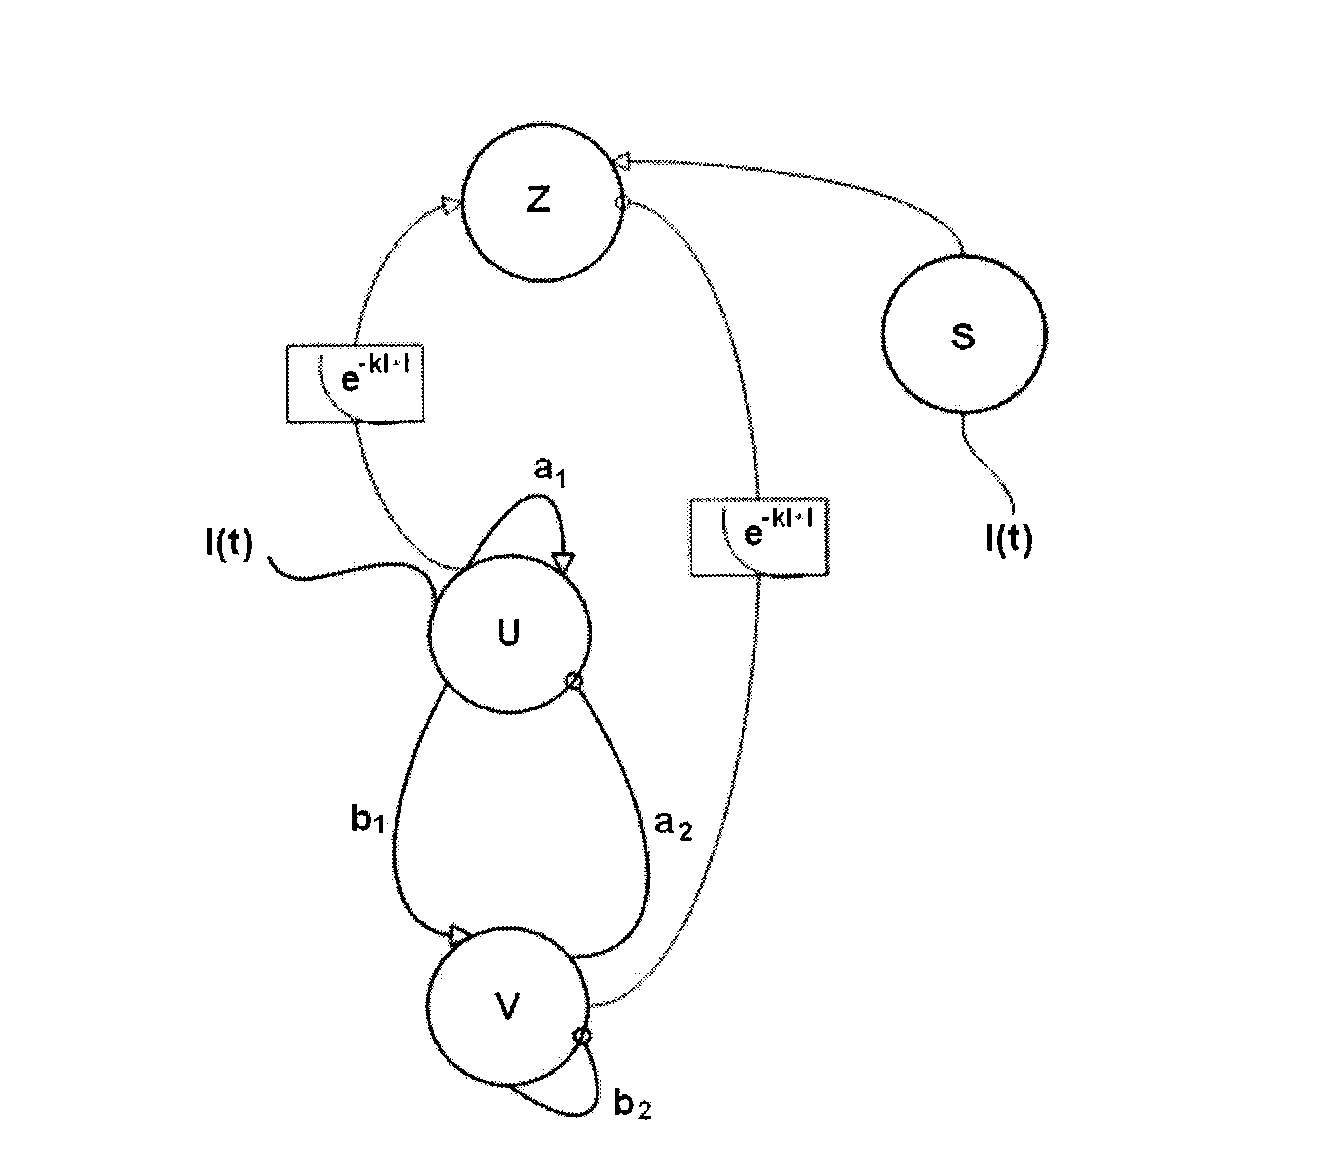 Neuron oscillator and chaotic neutral network based on the same